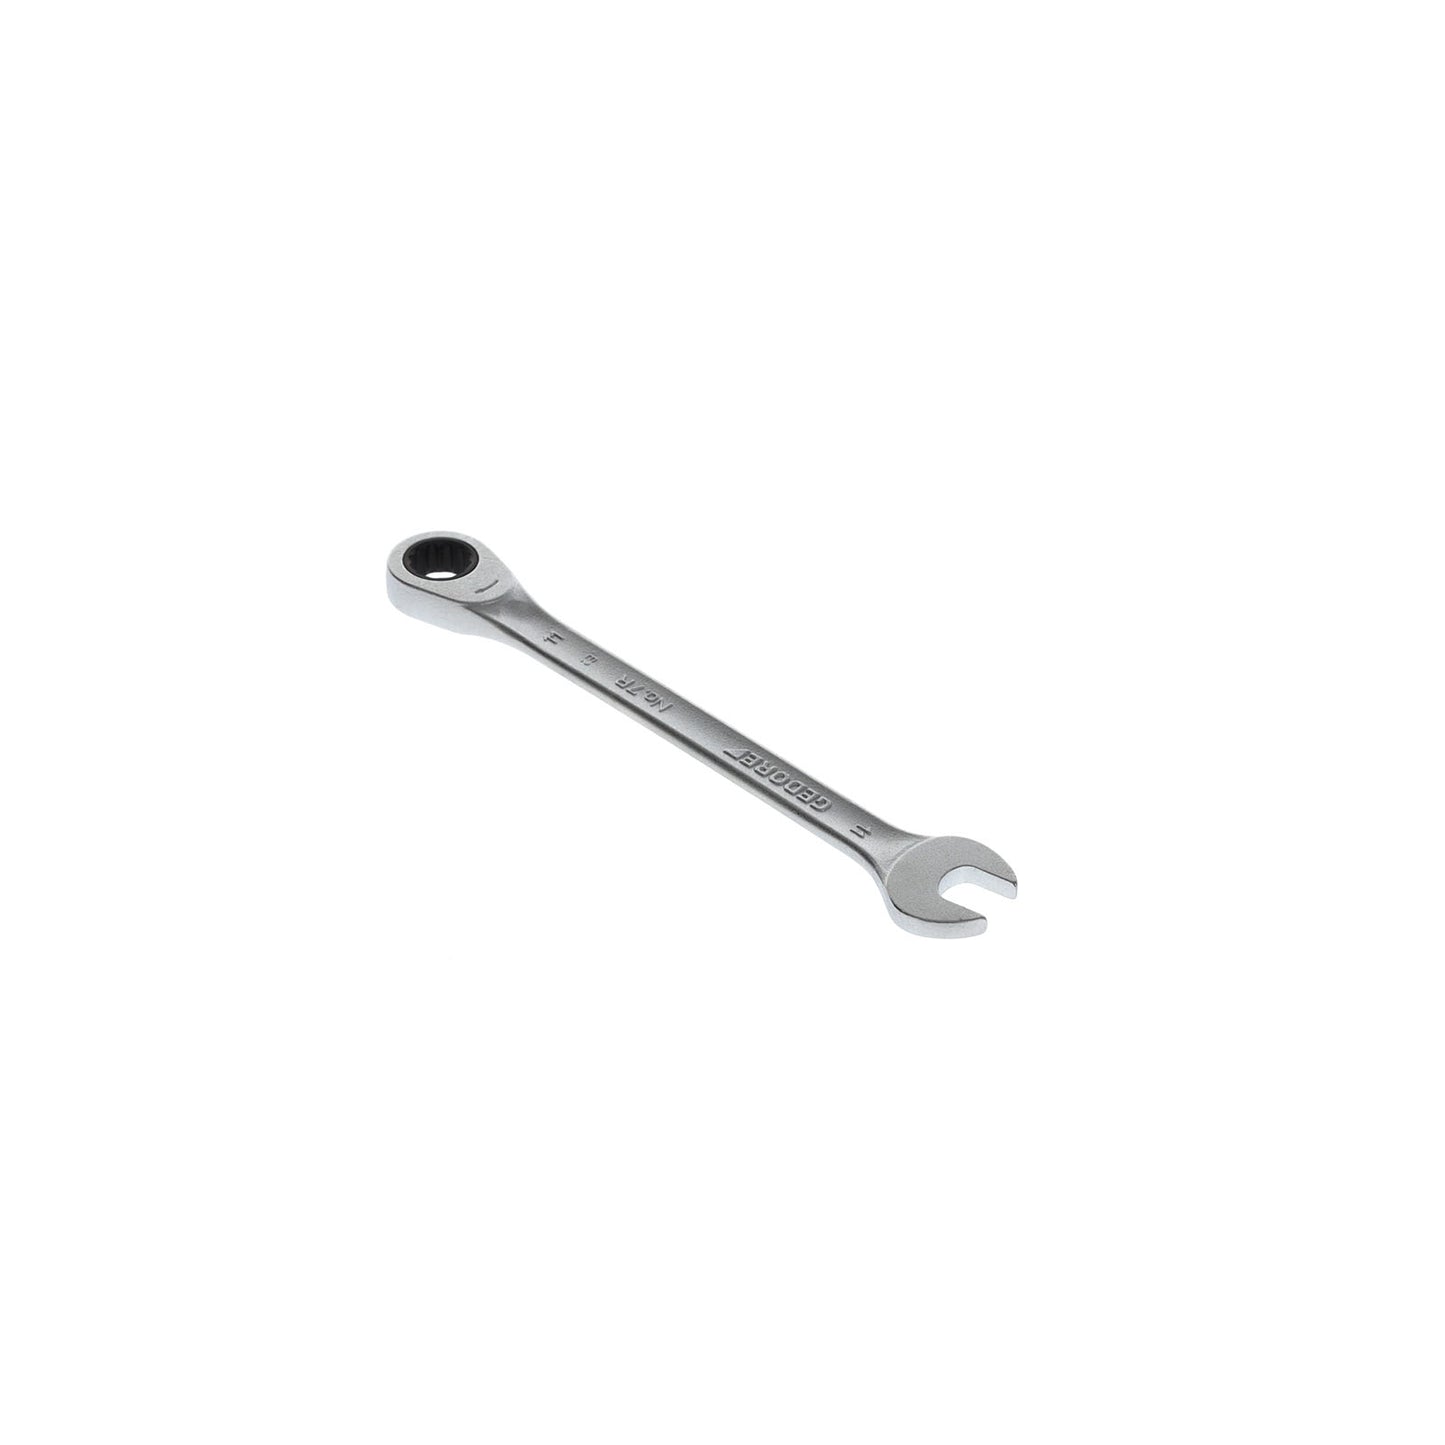 GEDORE 7 R 11 - Ratchet combination wrench, 11mm (2297094)